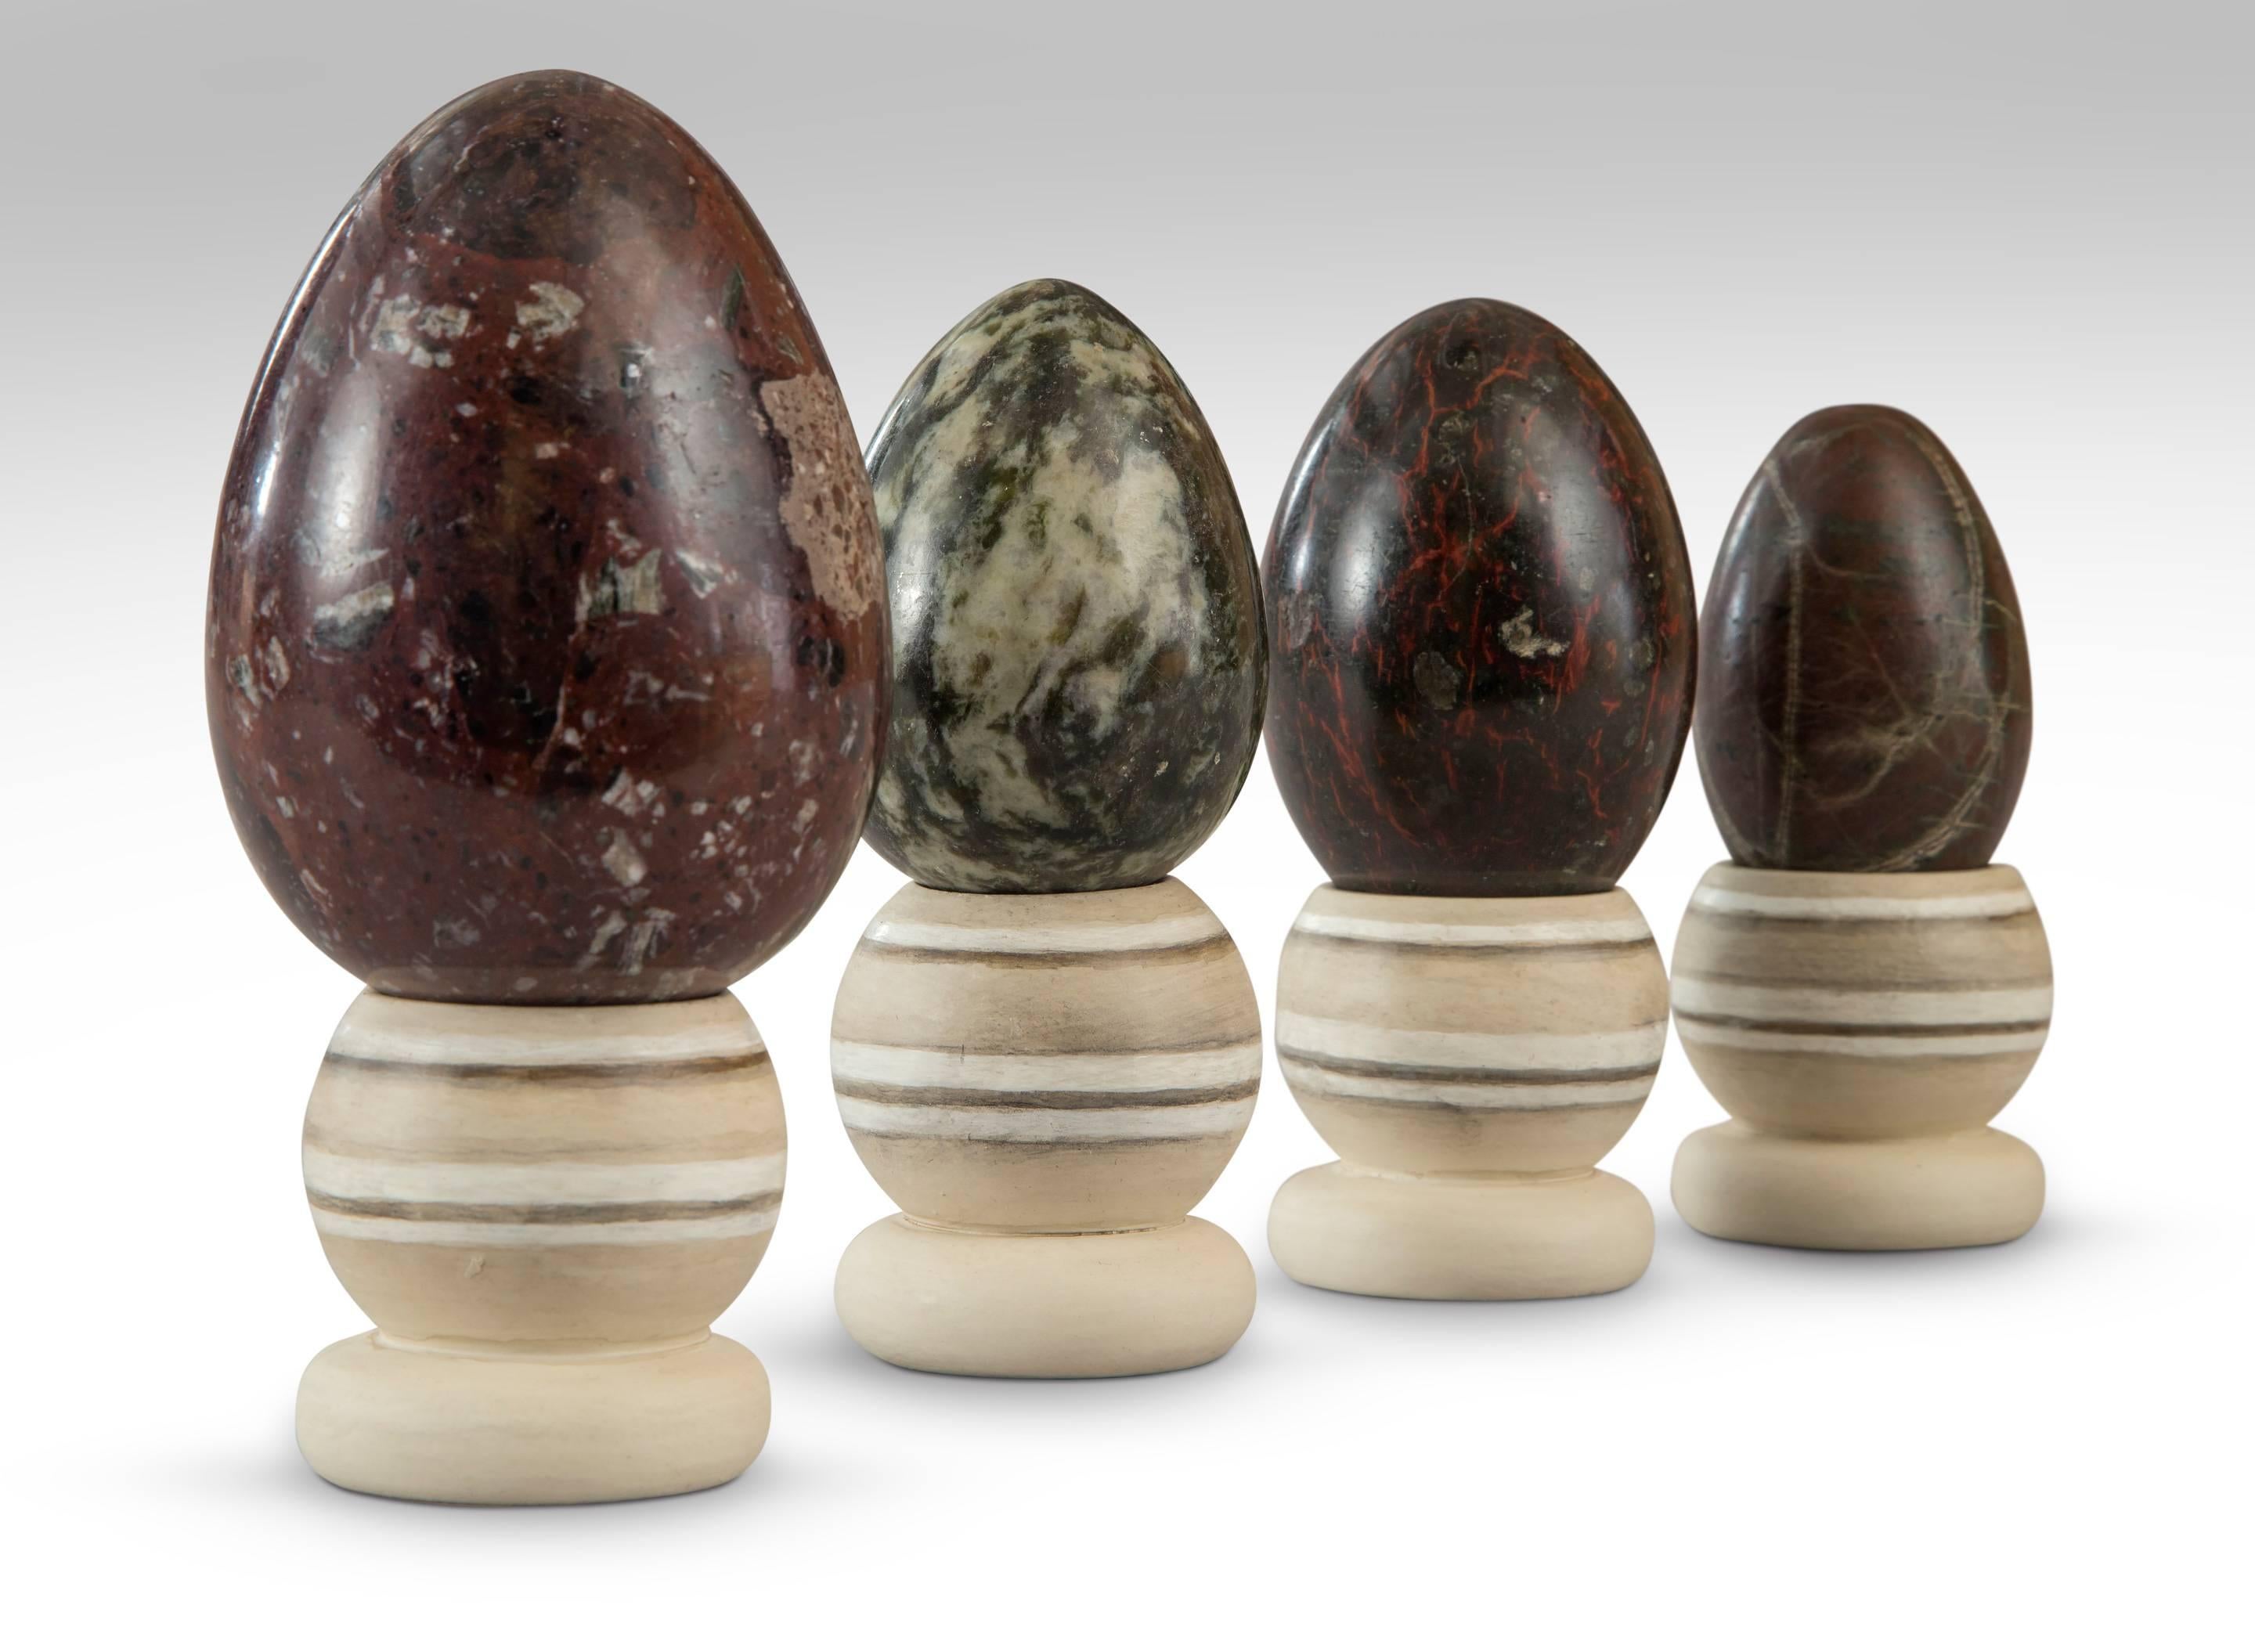 A set of four egg-shaped specimen marbles
An attractive set of variegated specimen marble eggs of graduated size on turned and painted wooden stands. Largest 5.75